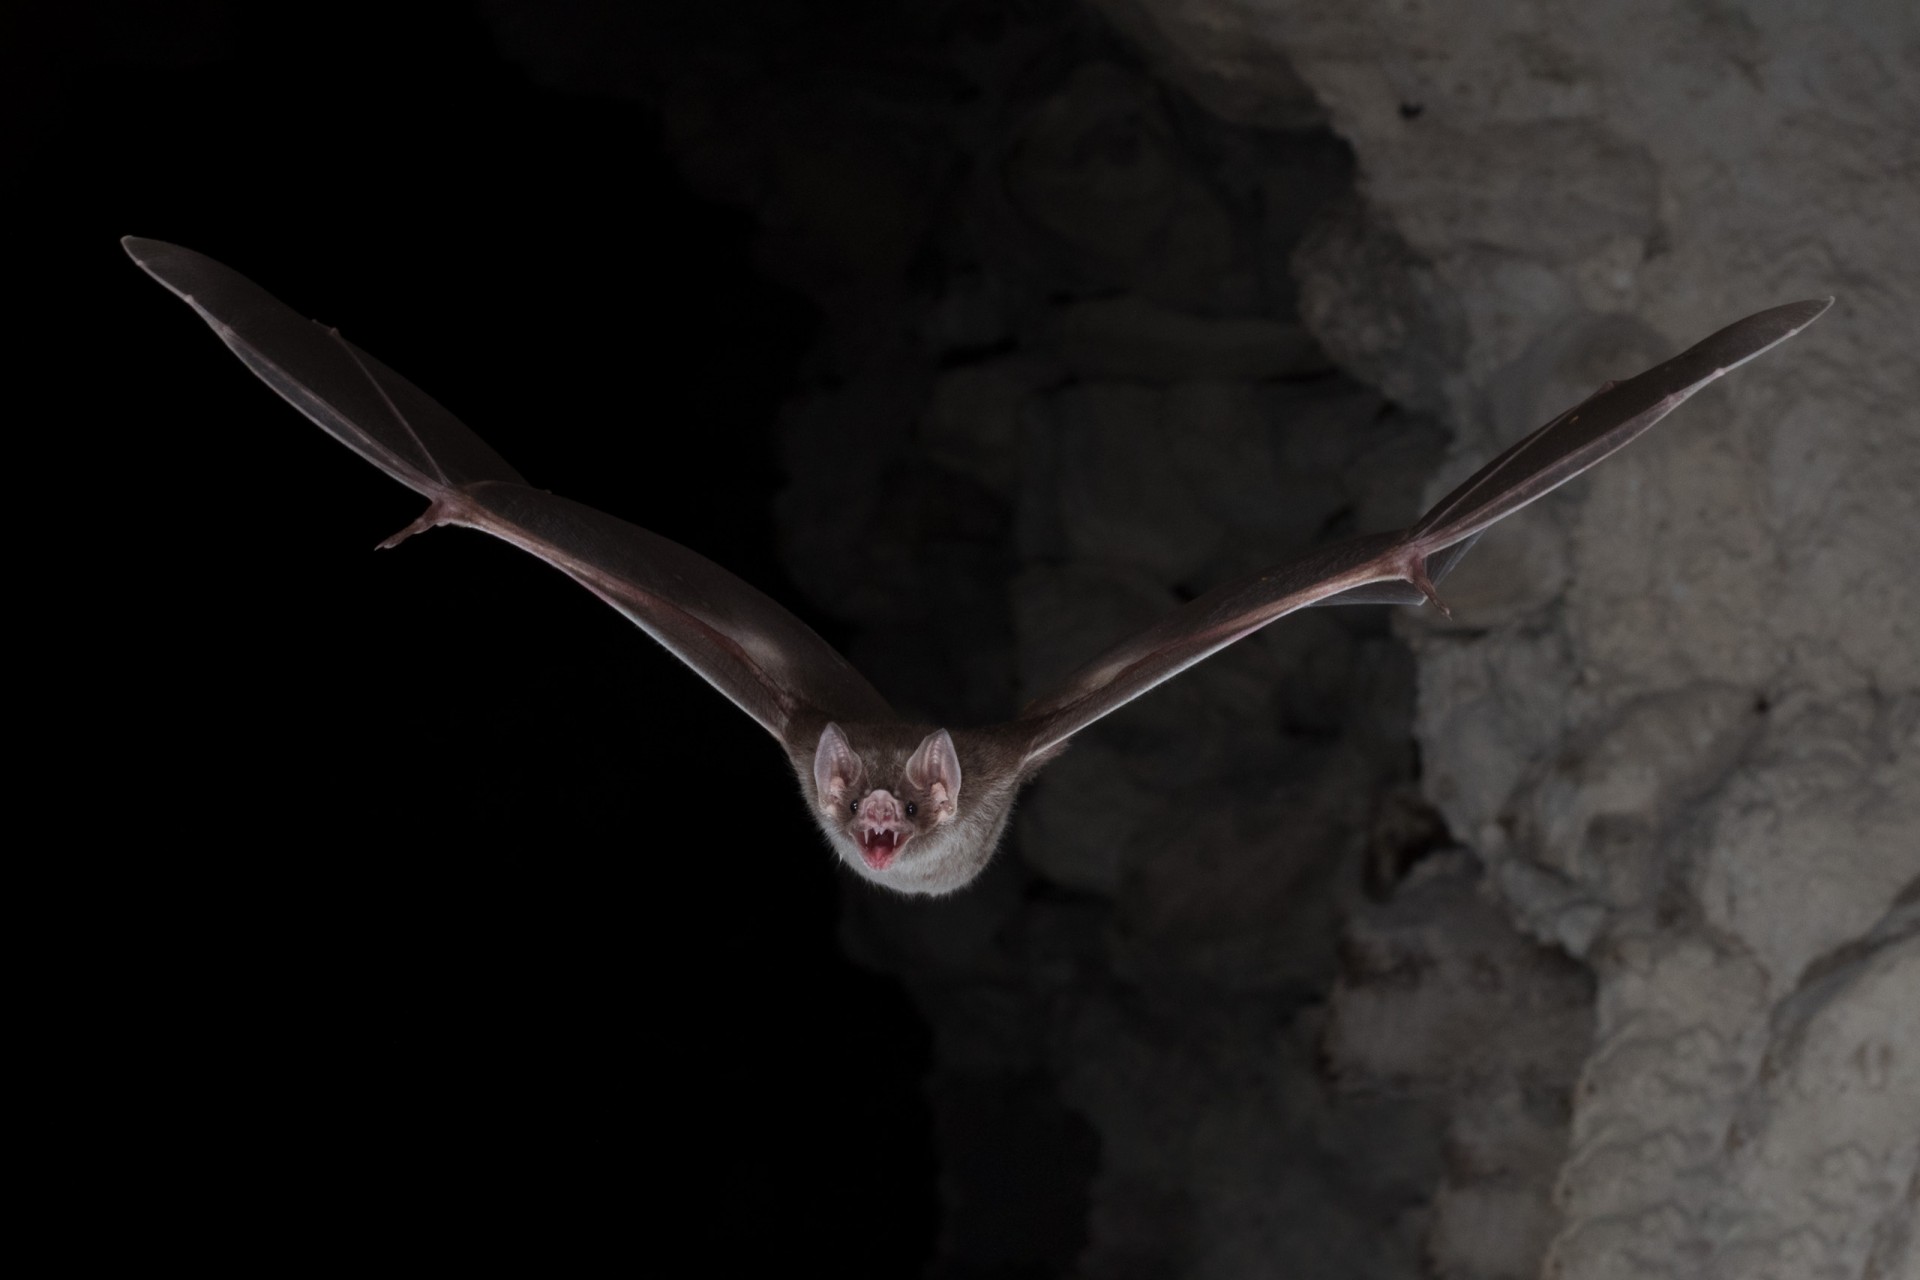 Vampire bat bonding persists from the lab to the wild